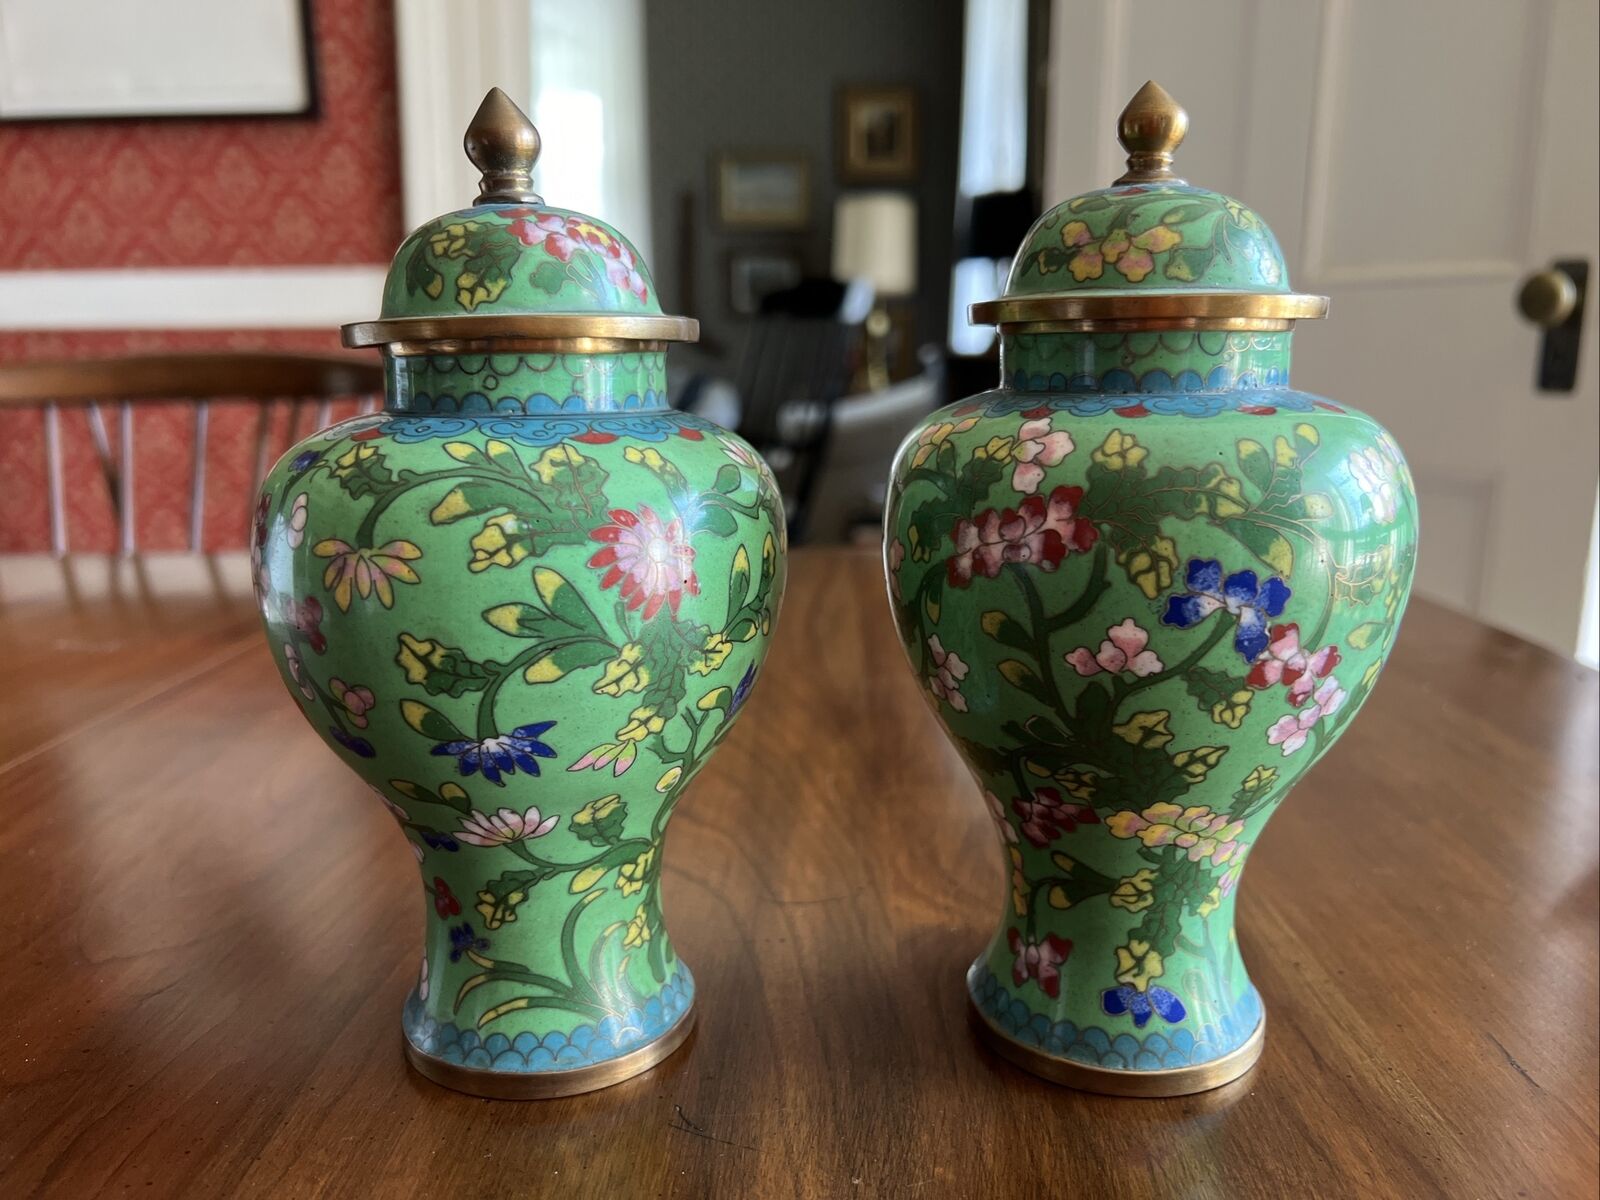 Rare Pair Antique Cloisonne Temple Jars, Made In China, 7” H; Early 20th C.